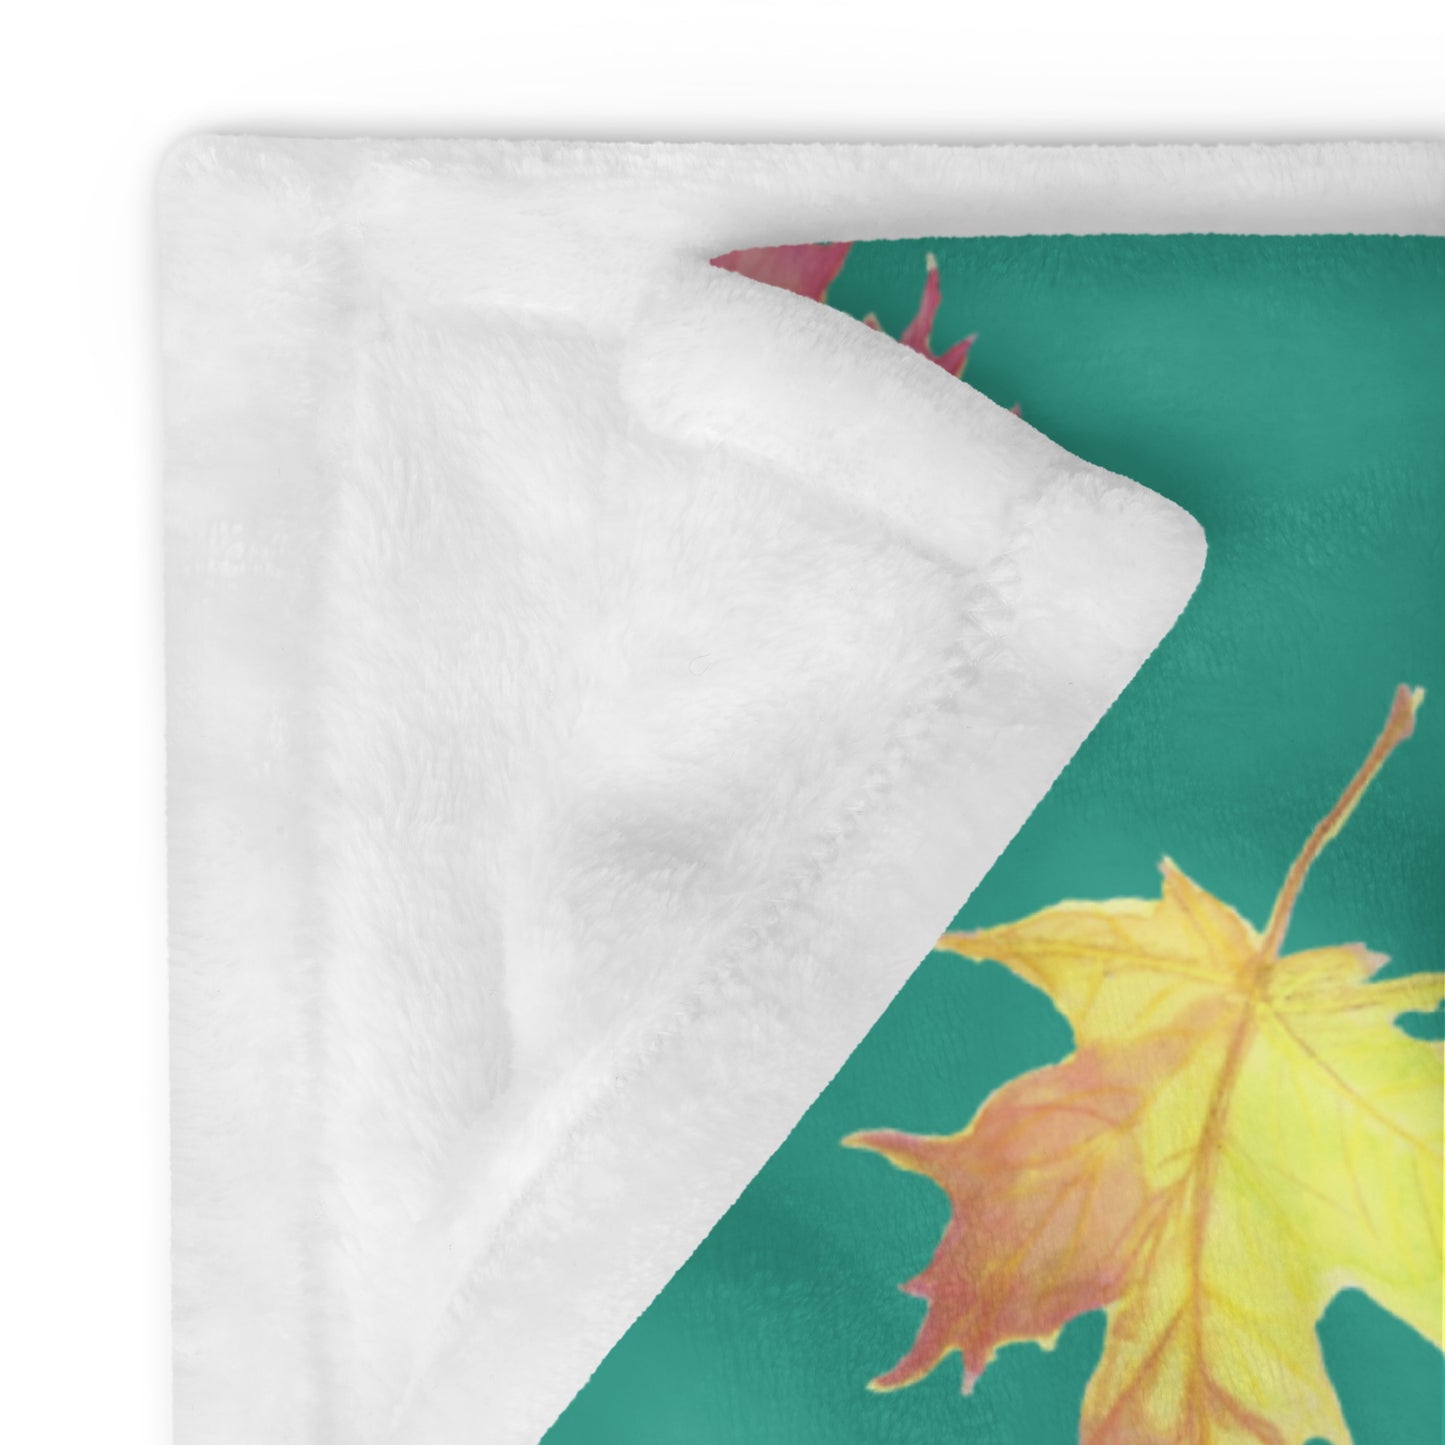 50 by 60 inch soft throw blanket featuring watercolor fall leaves patterned on a dark green background. Show with corner folded over to show white underside.